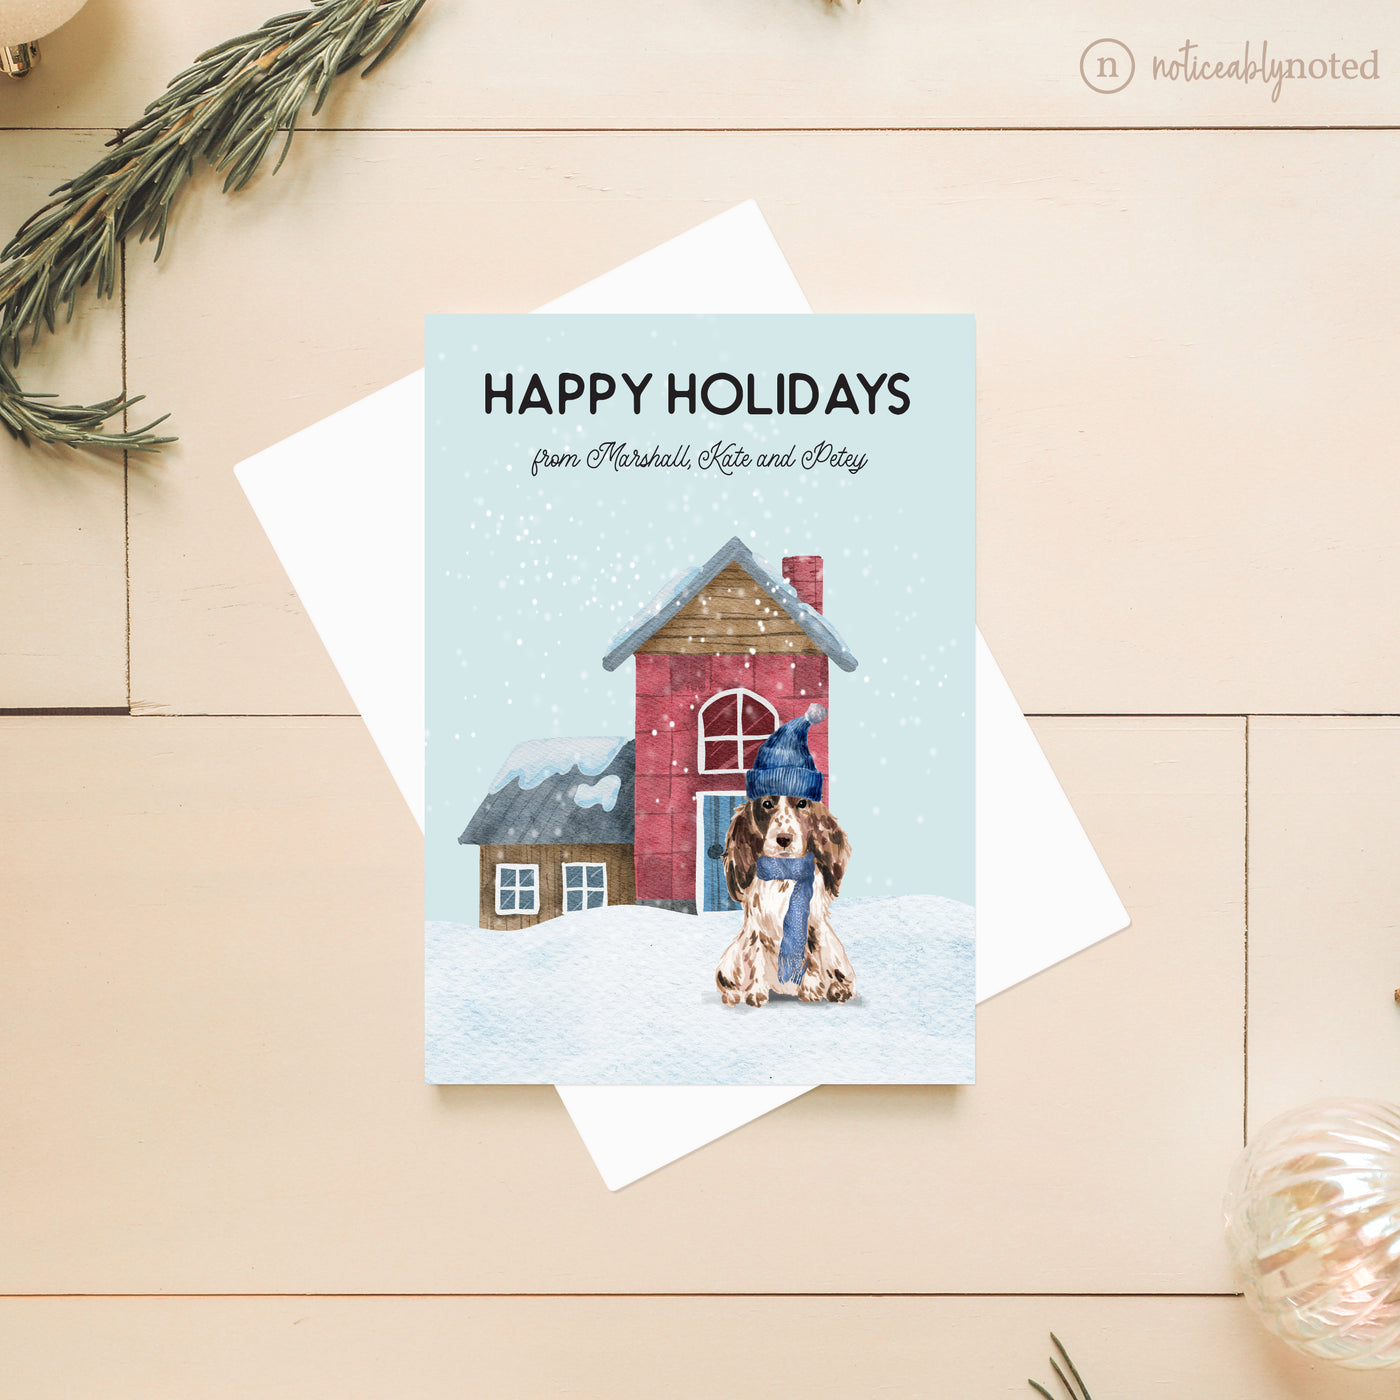 Brown and White Cocker Spaniel Holiday Card | Noticeably Noted